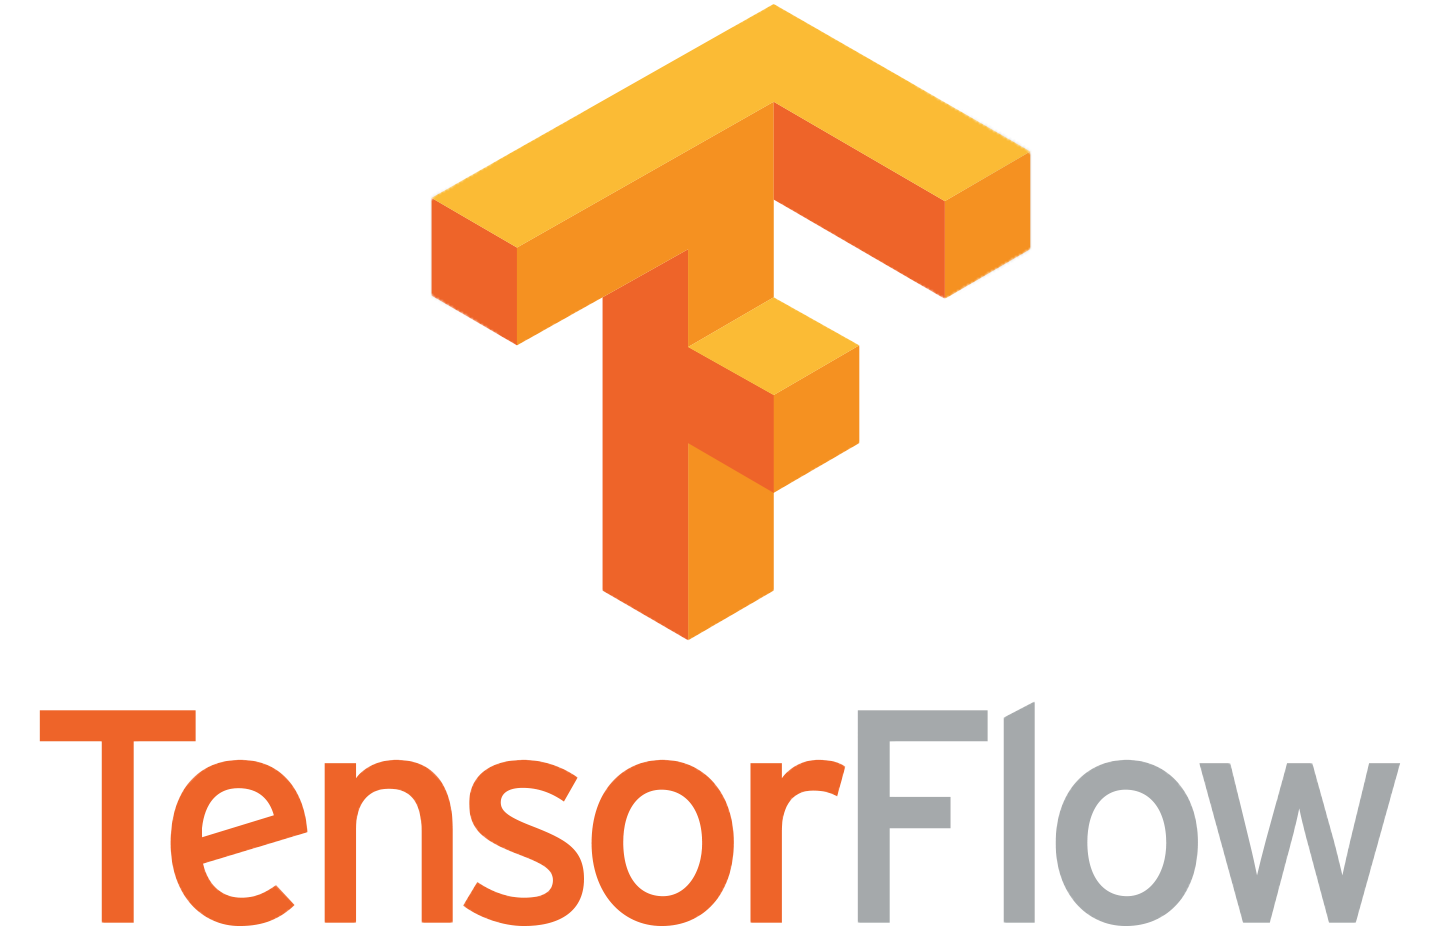 Installation of Tensorflow with Python on Eclipse for Windows